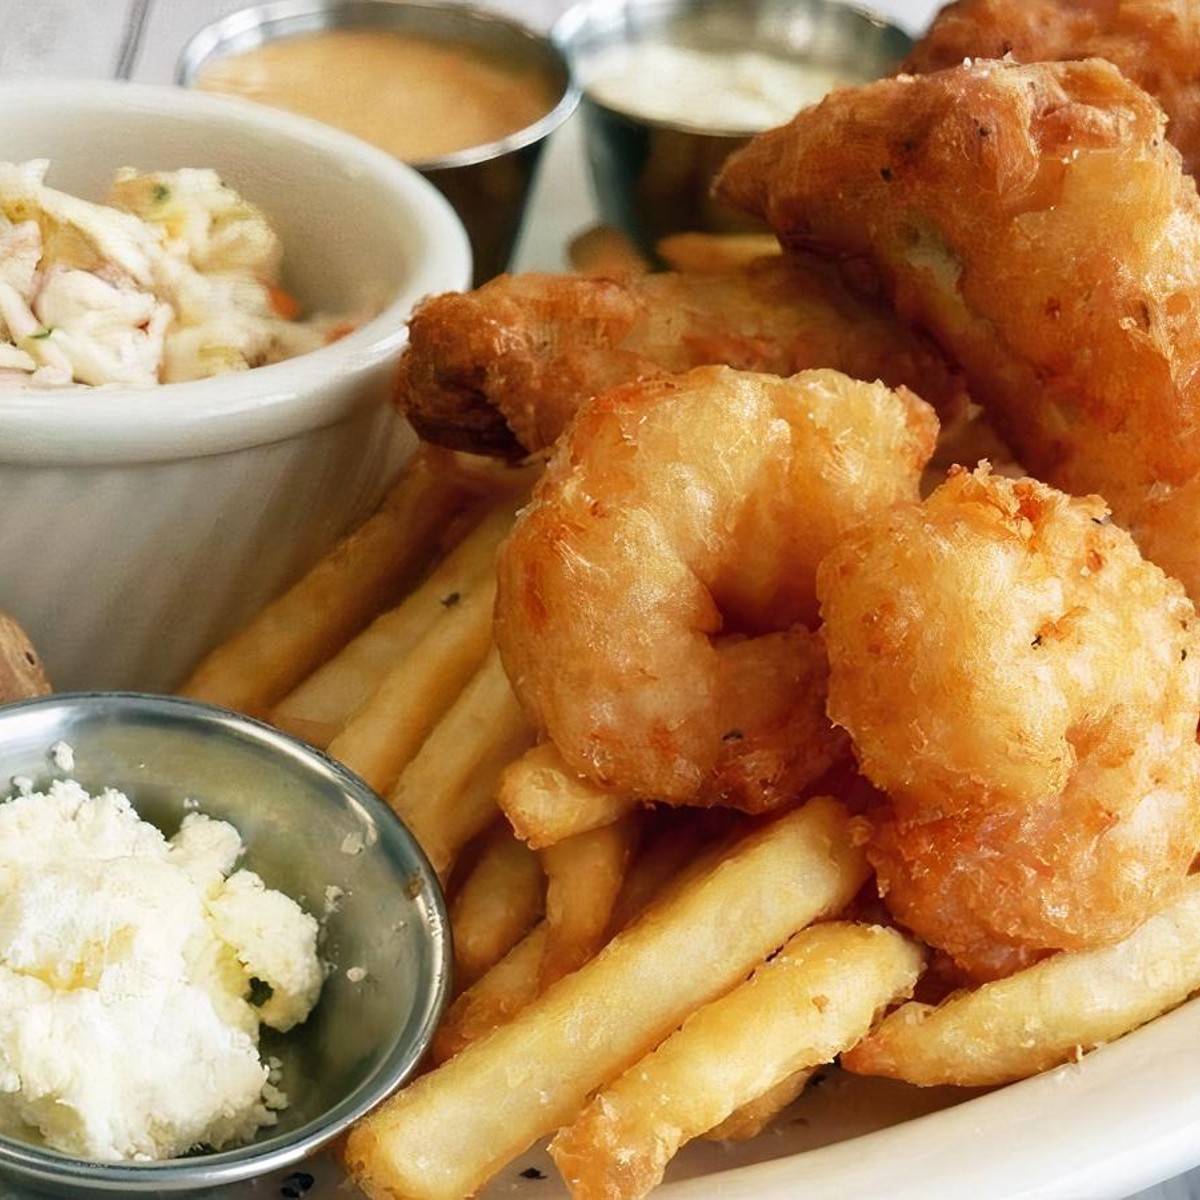 Milwaukee's Tupelo Honey opens with Southern fare (and fish fry)